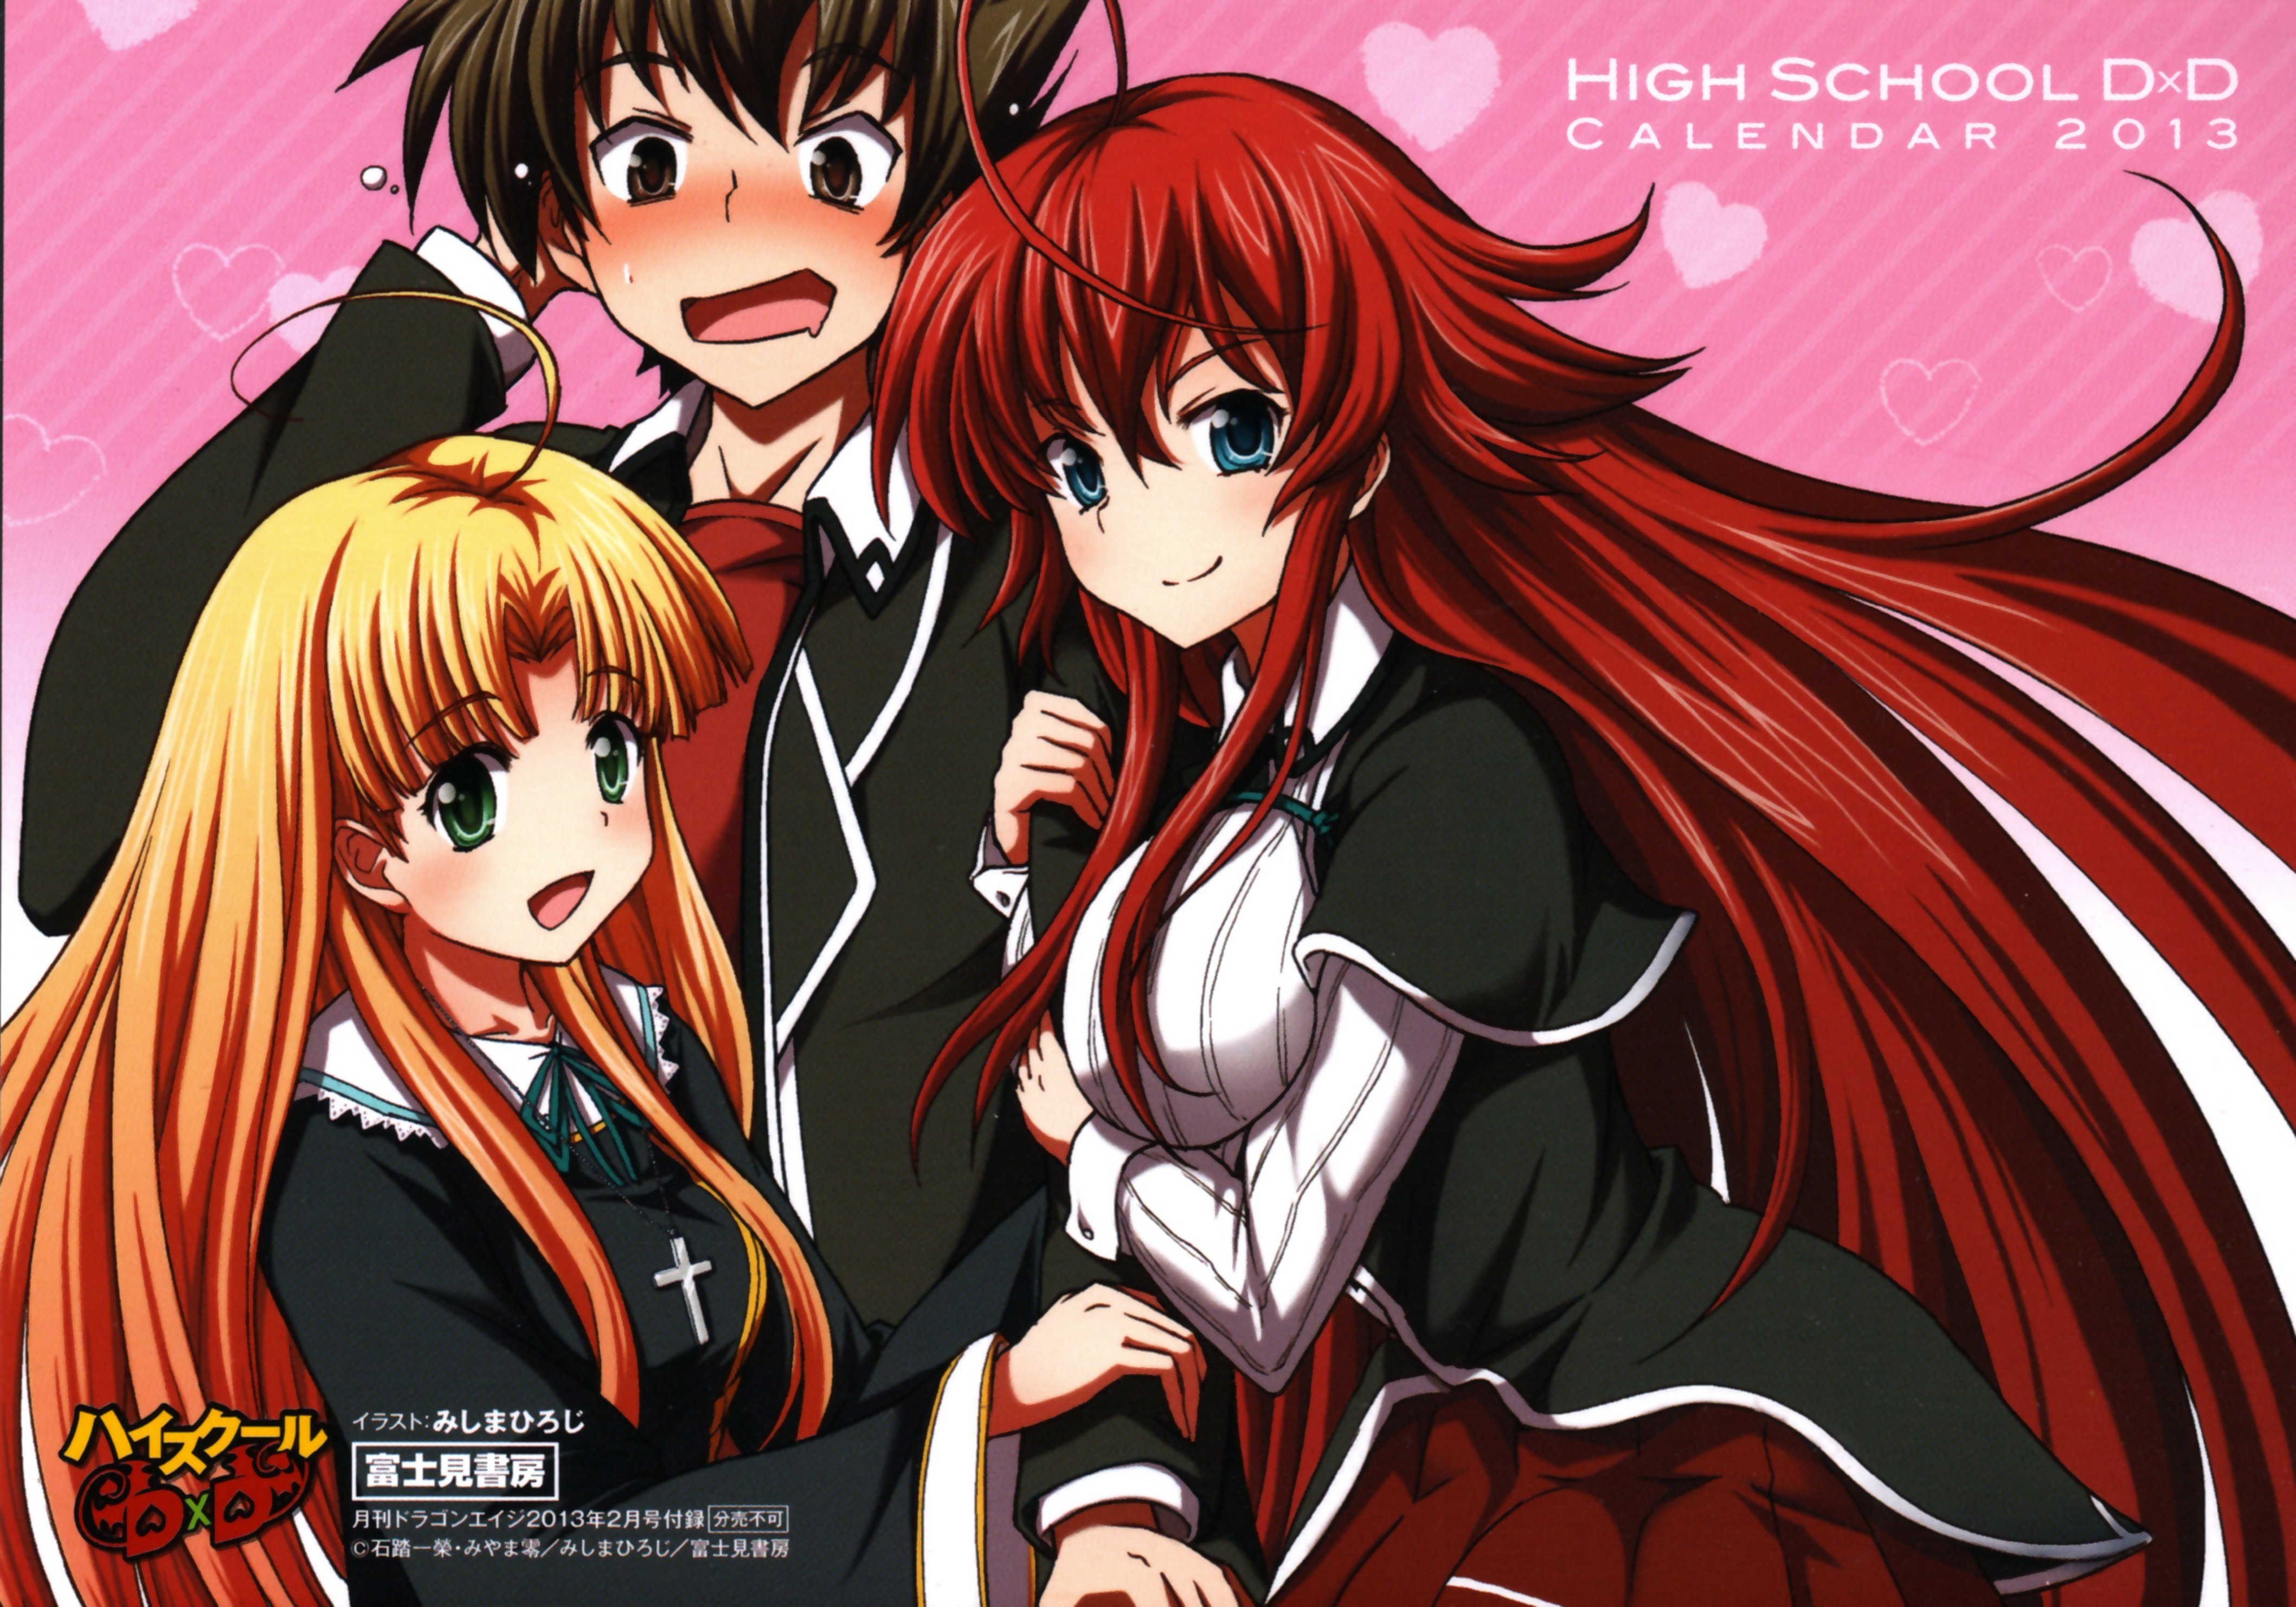 High School DxD NEW.Android wallpaper.2160×1920 (1 